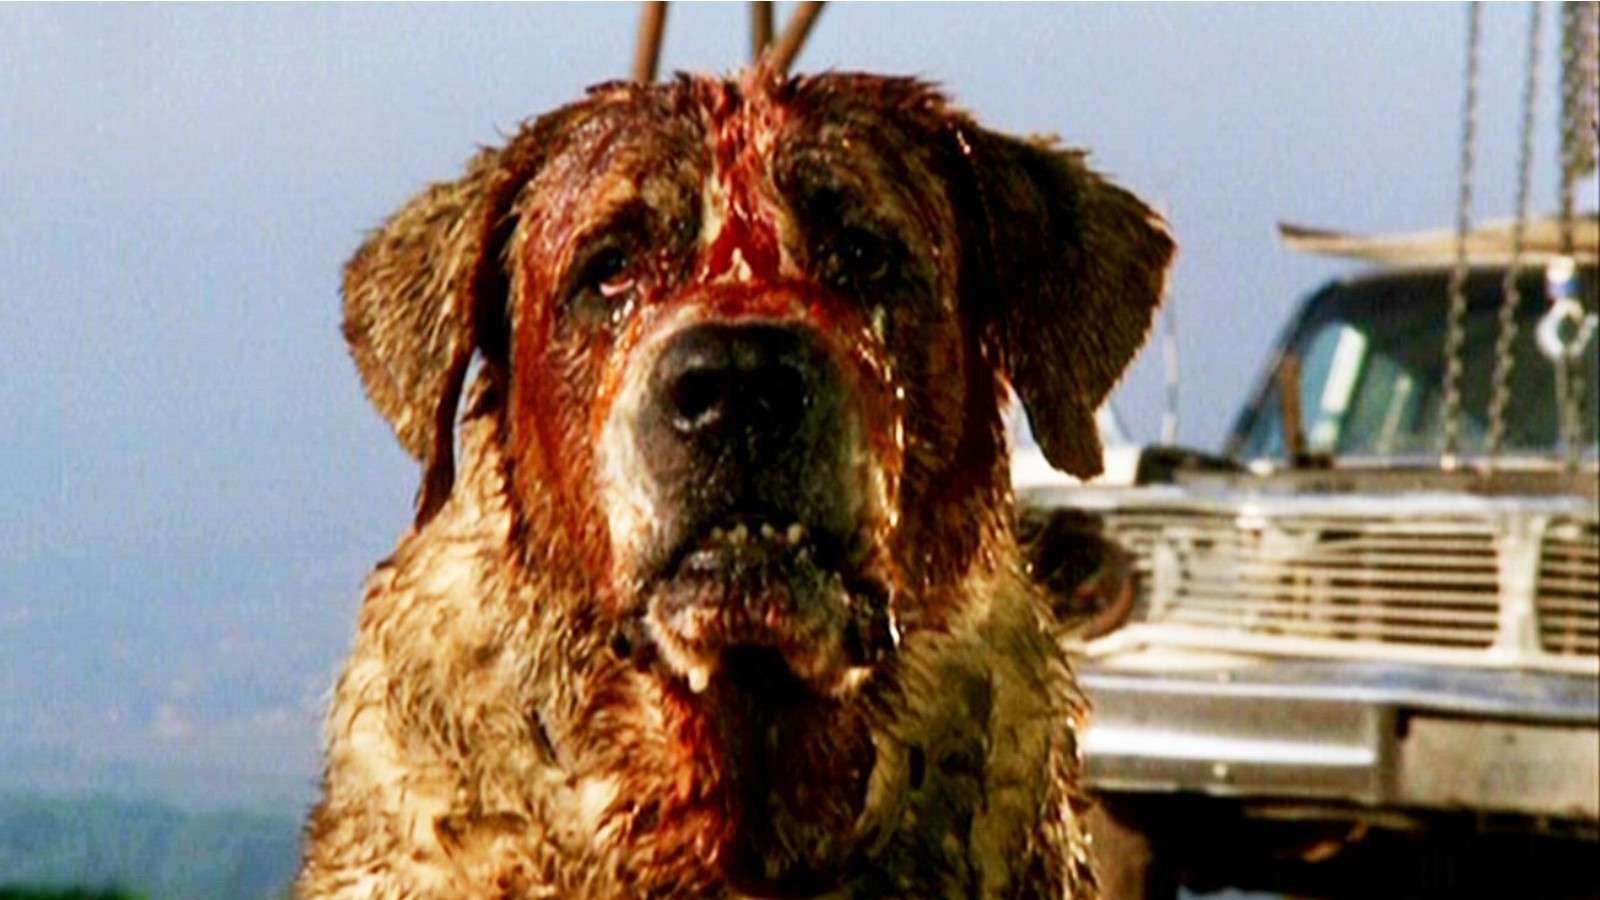 Cujo the dog looking bloody.